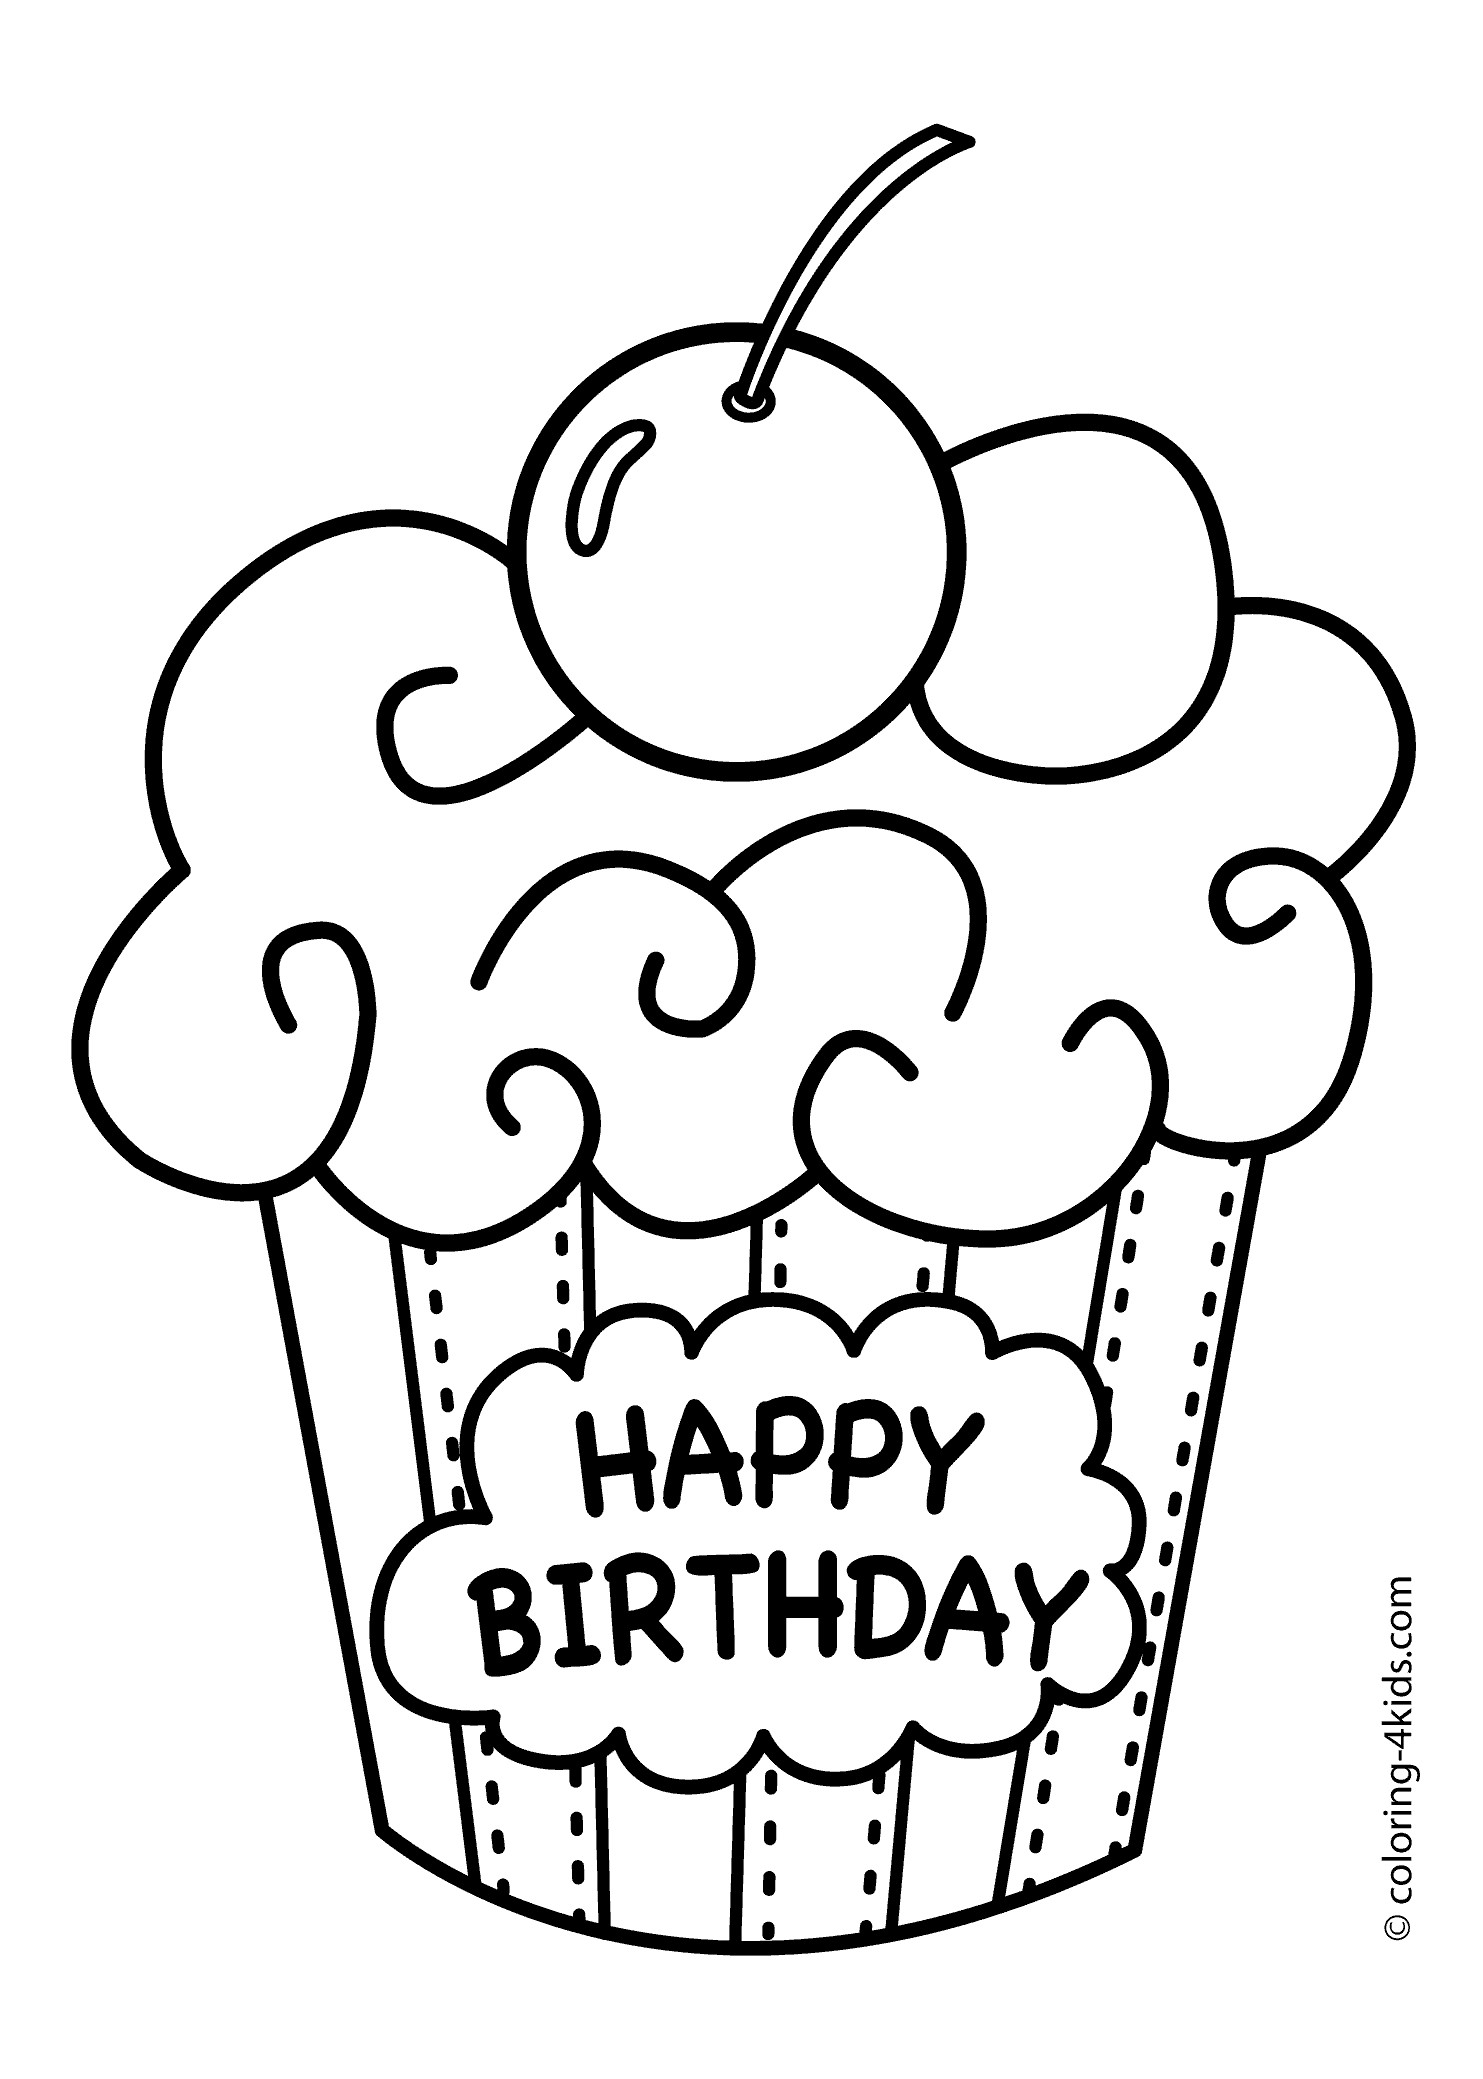 Happy Birthday Coloring Pages For Teens
 Cake Happy Birthday Party Coloring Pages – muffin coloring